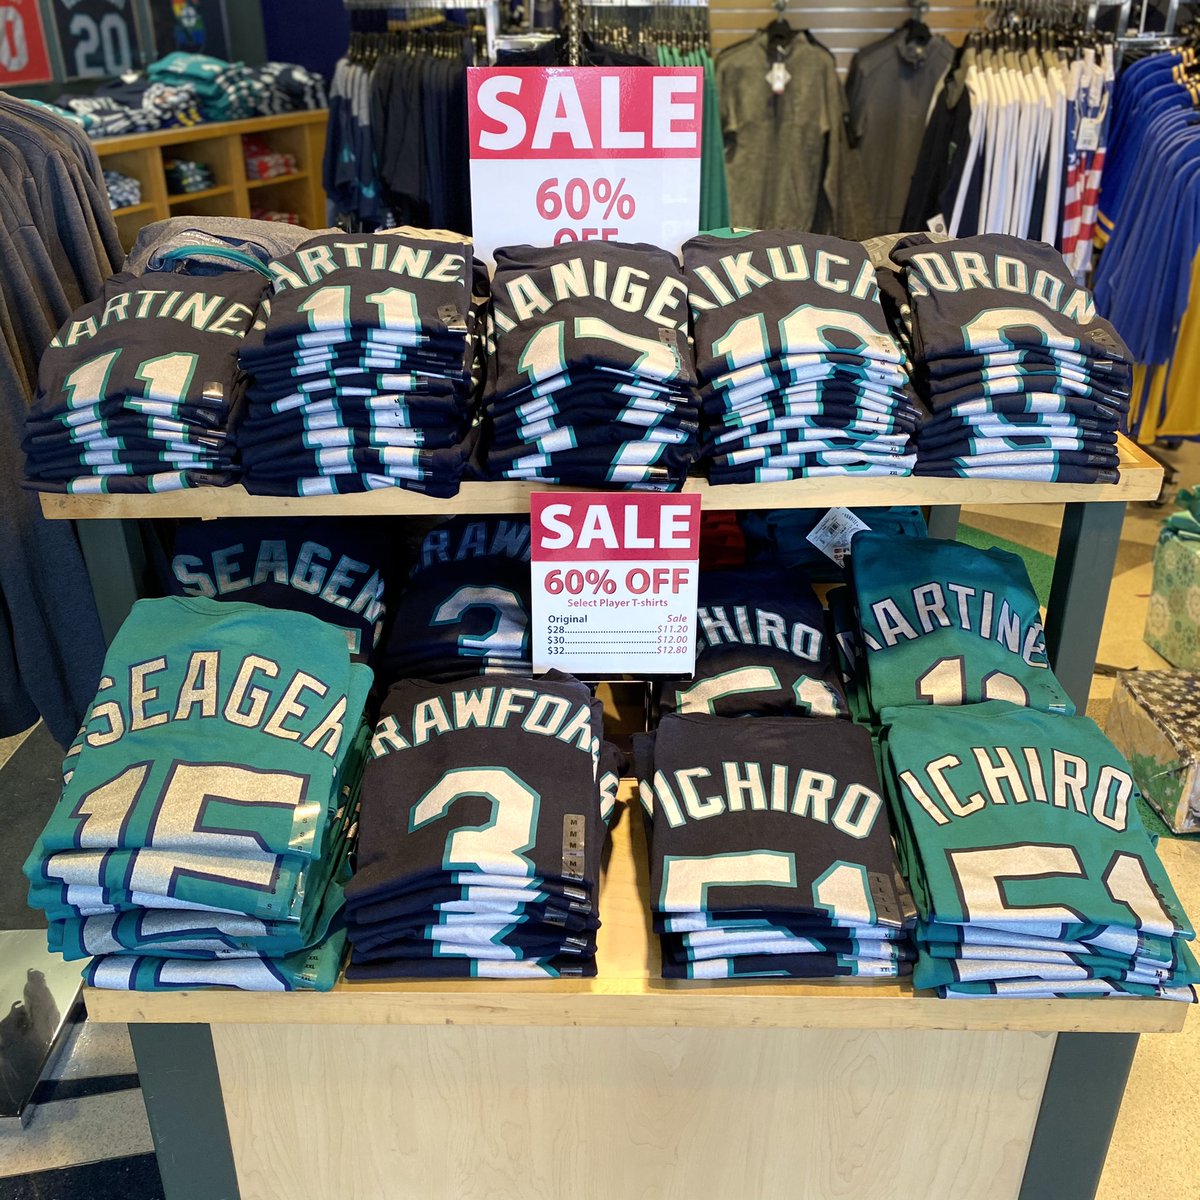 seattle mariners store